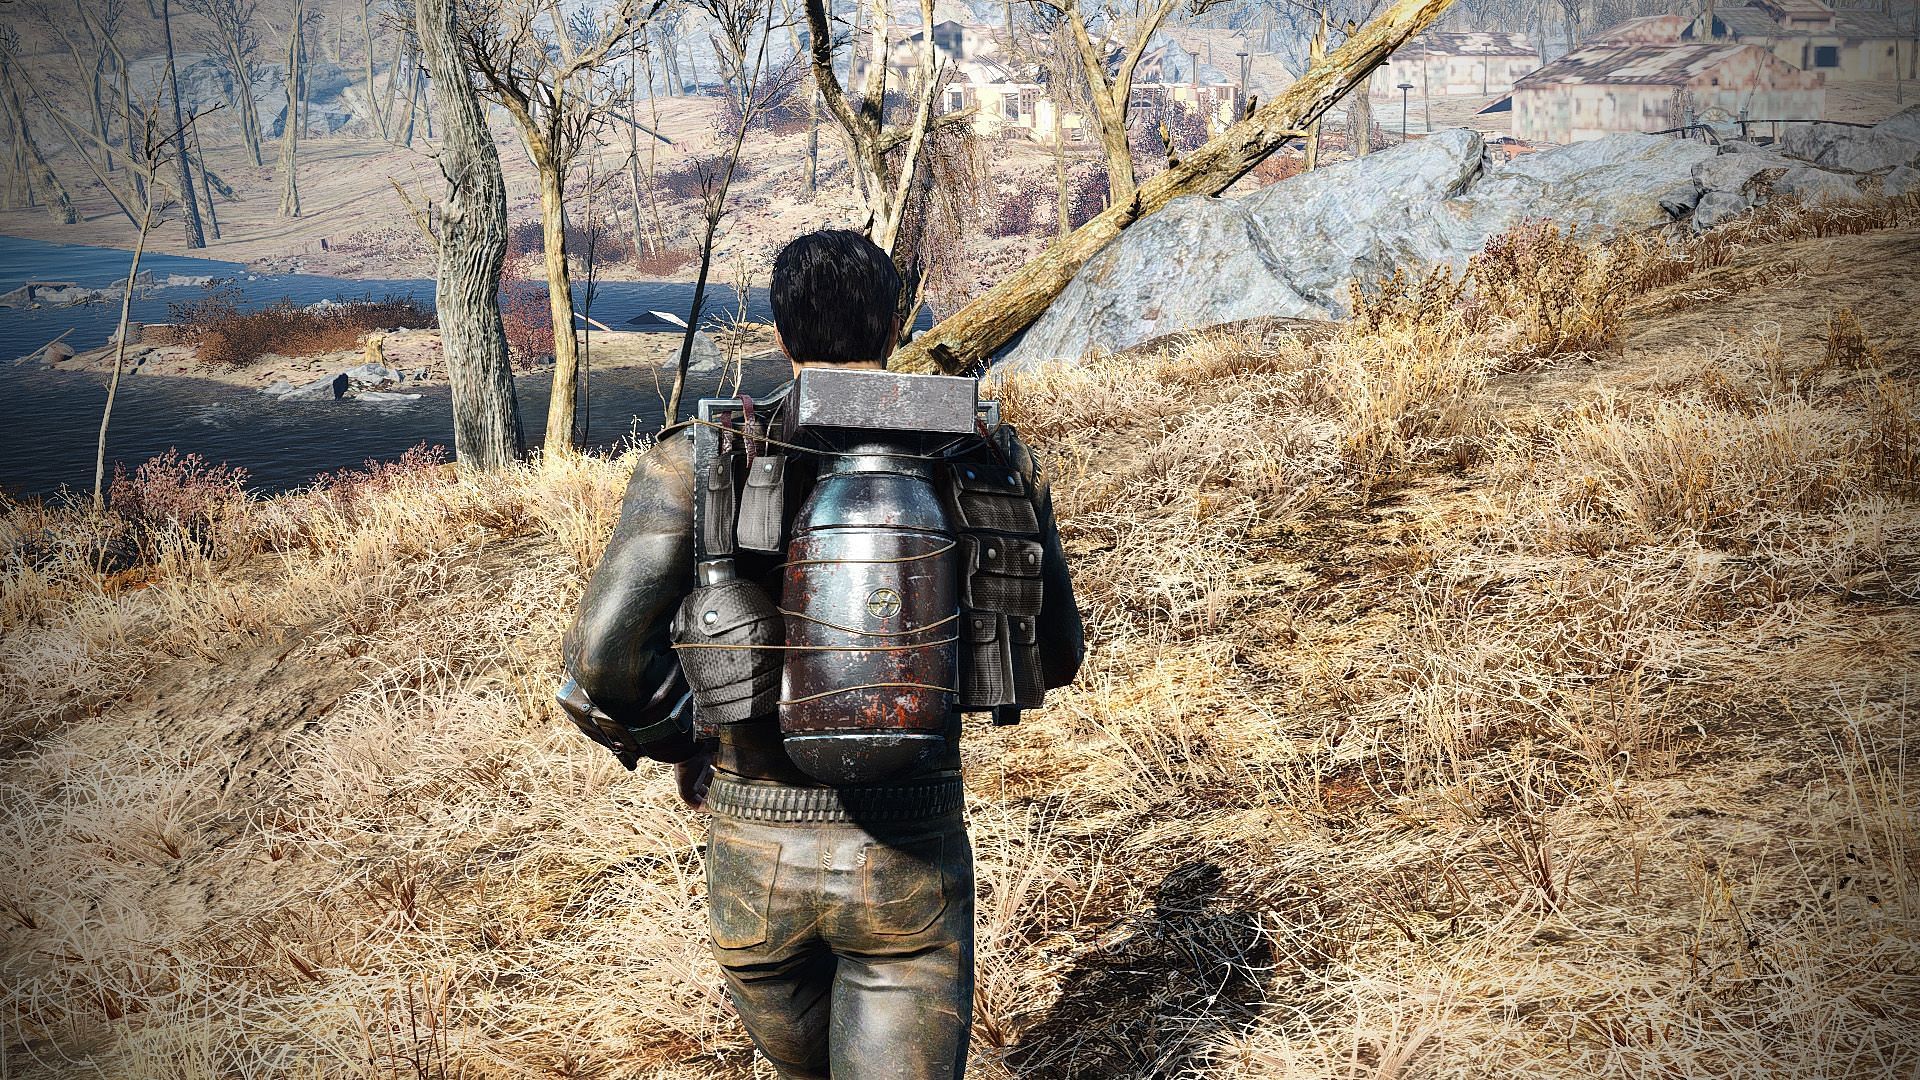 Image 3 - Fallout 3 - Remastered Survival Edition mod for Fallout 3 - ModDB